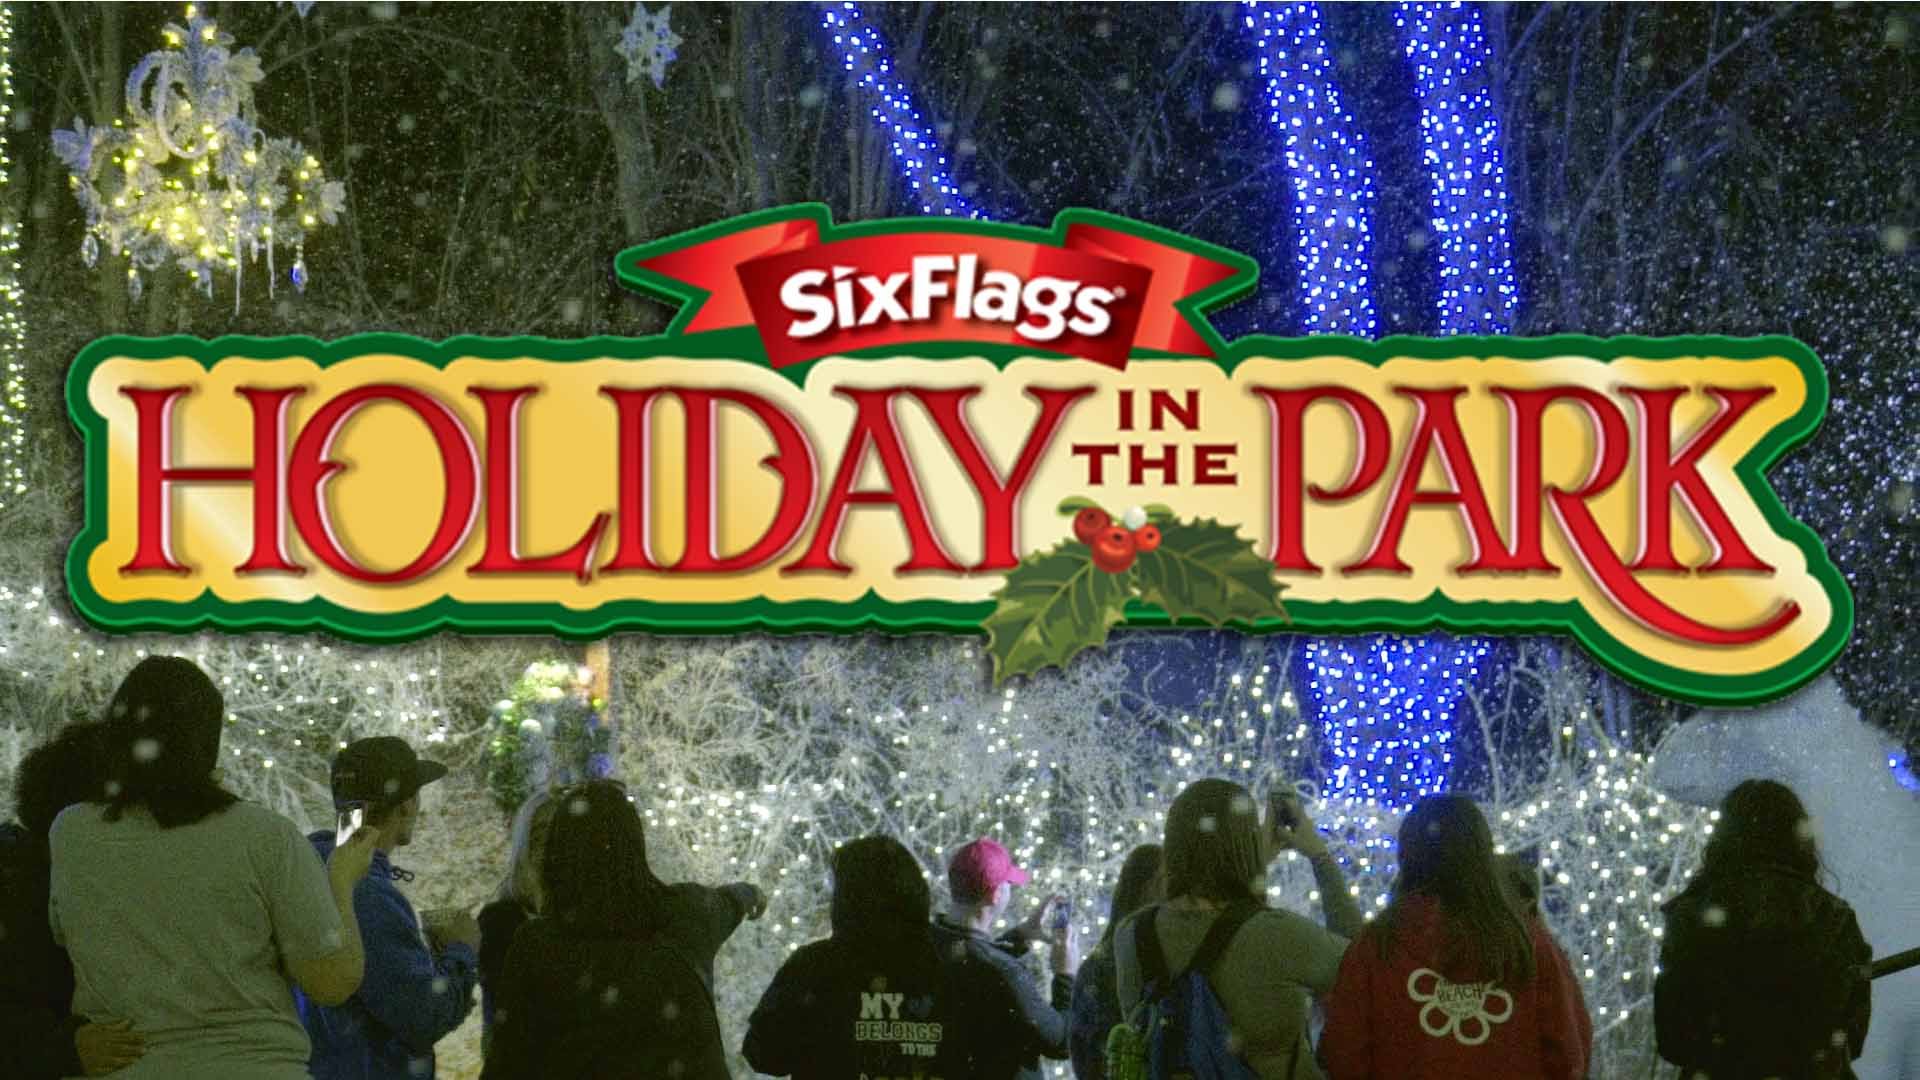 Holiday in the Park at Six Flags Highlights (Christmas) - YouTube